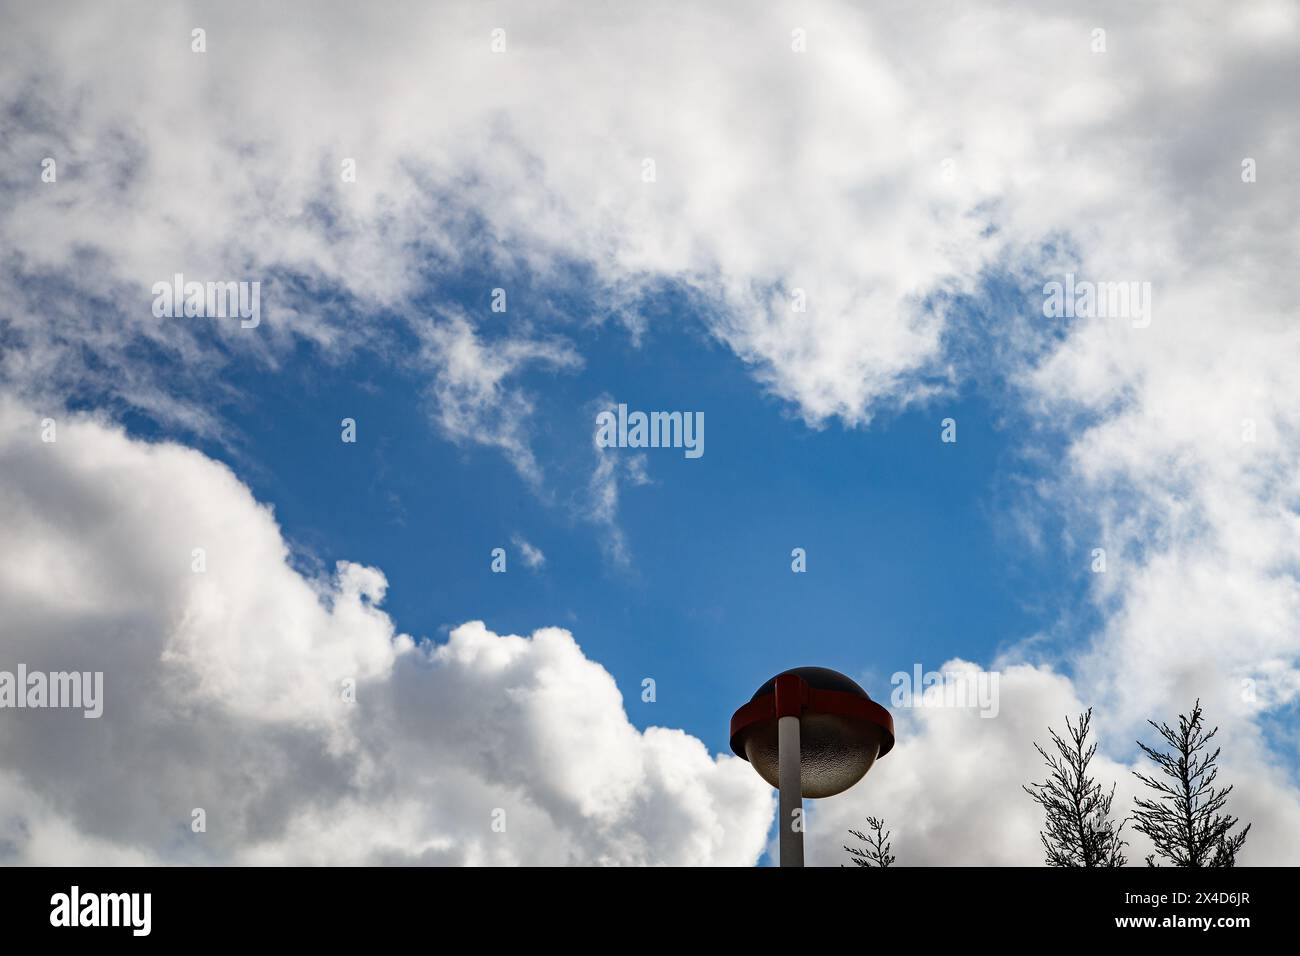 Street lamp with clouds in Els Poblets Stock Photo